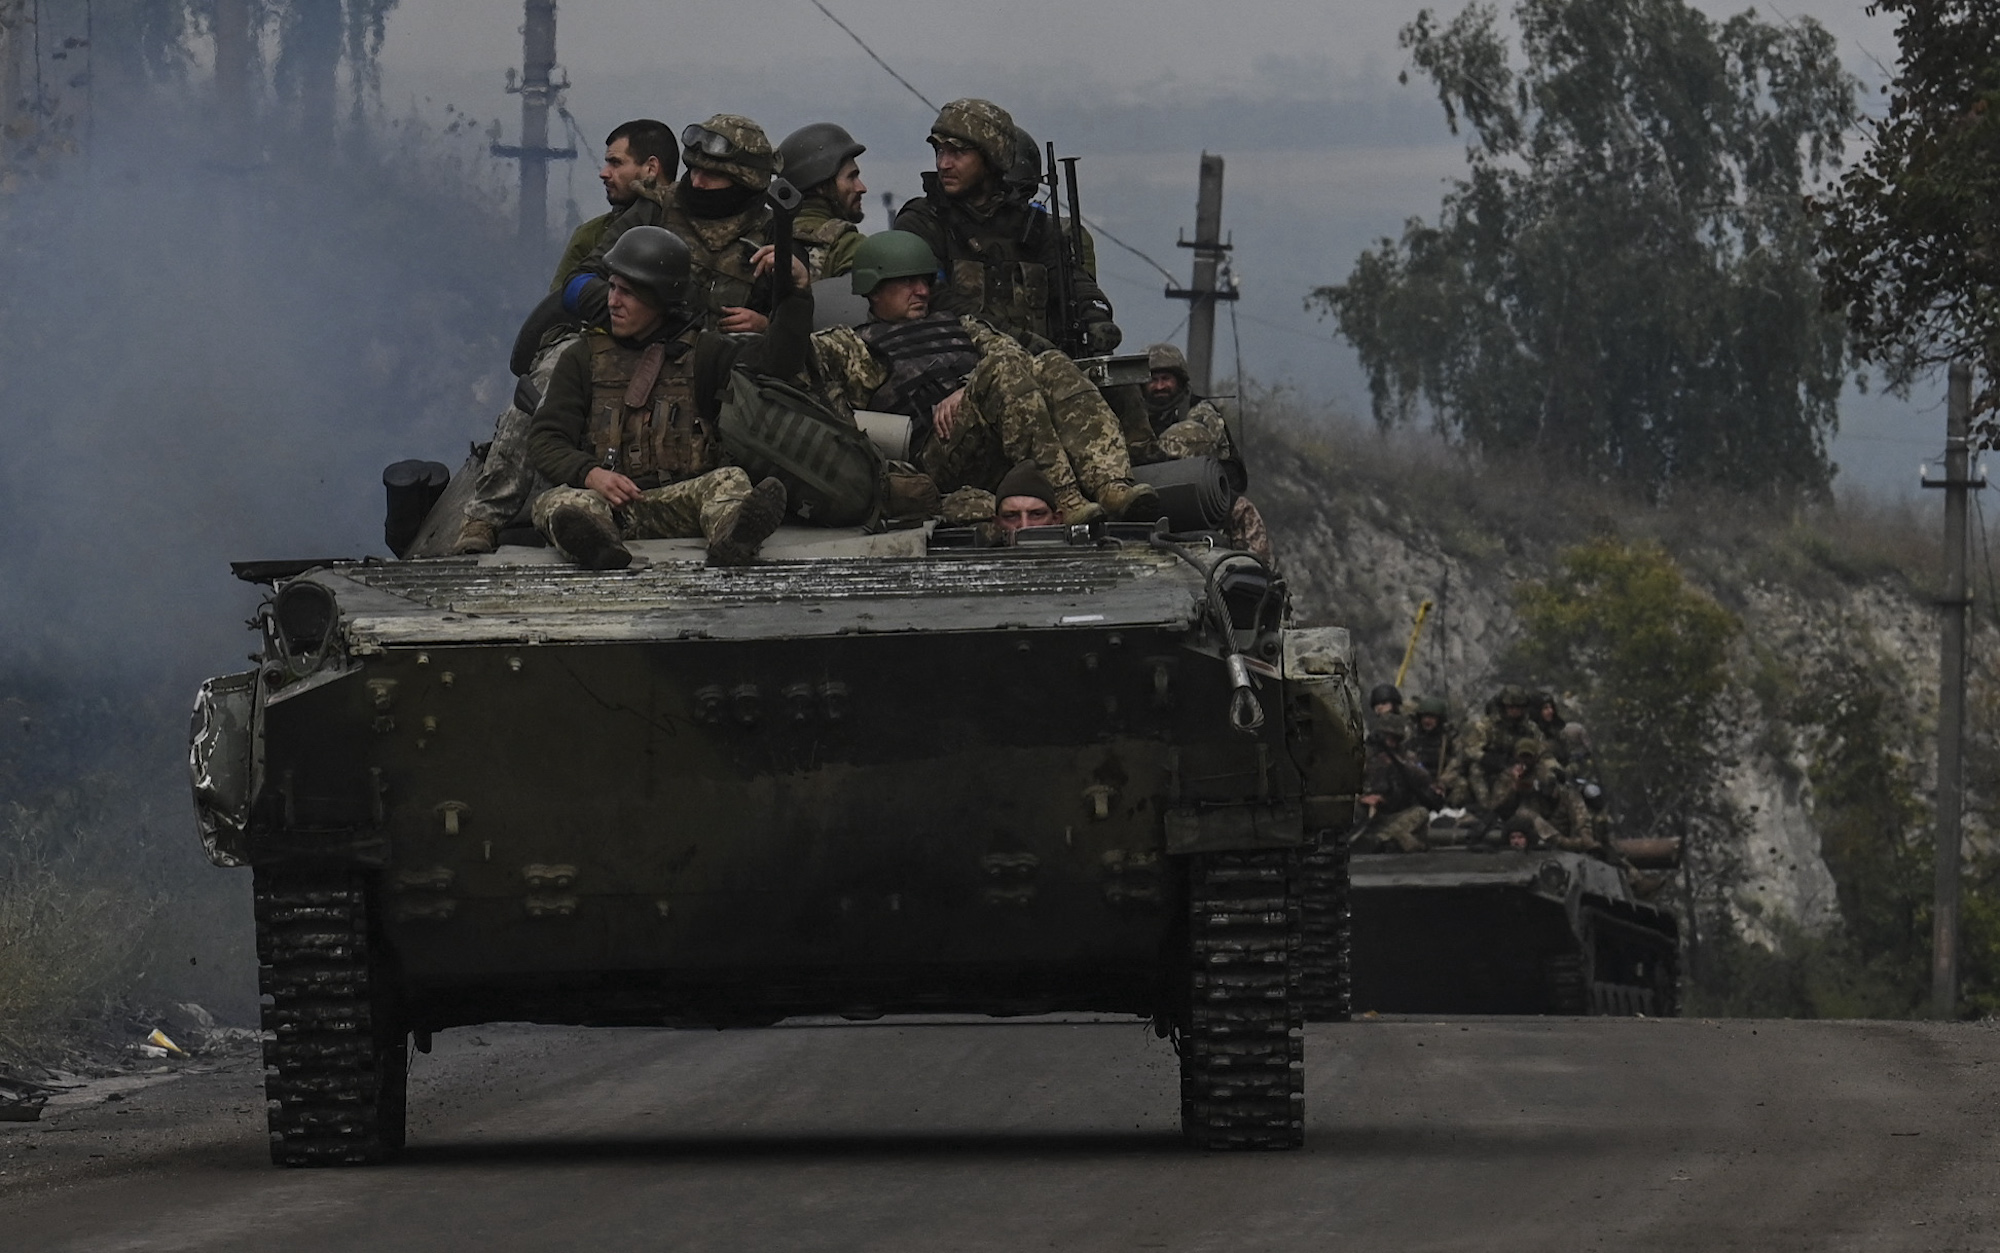 Ukrainian soldiers sit on infantry vehicles as they drive near Izium, Kharkiv Oblast on September 16.